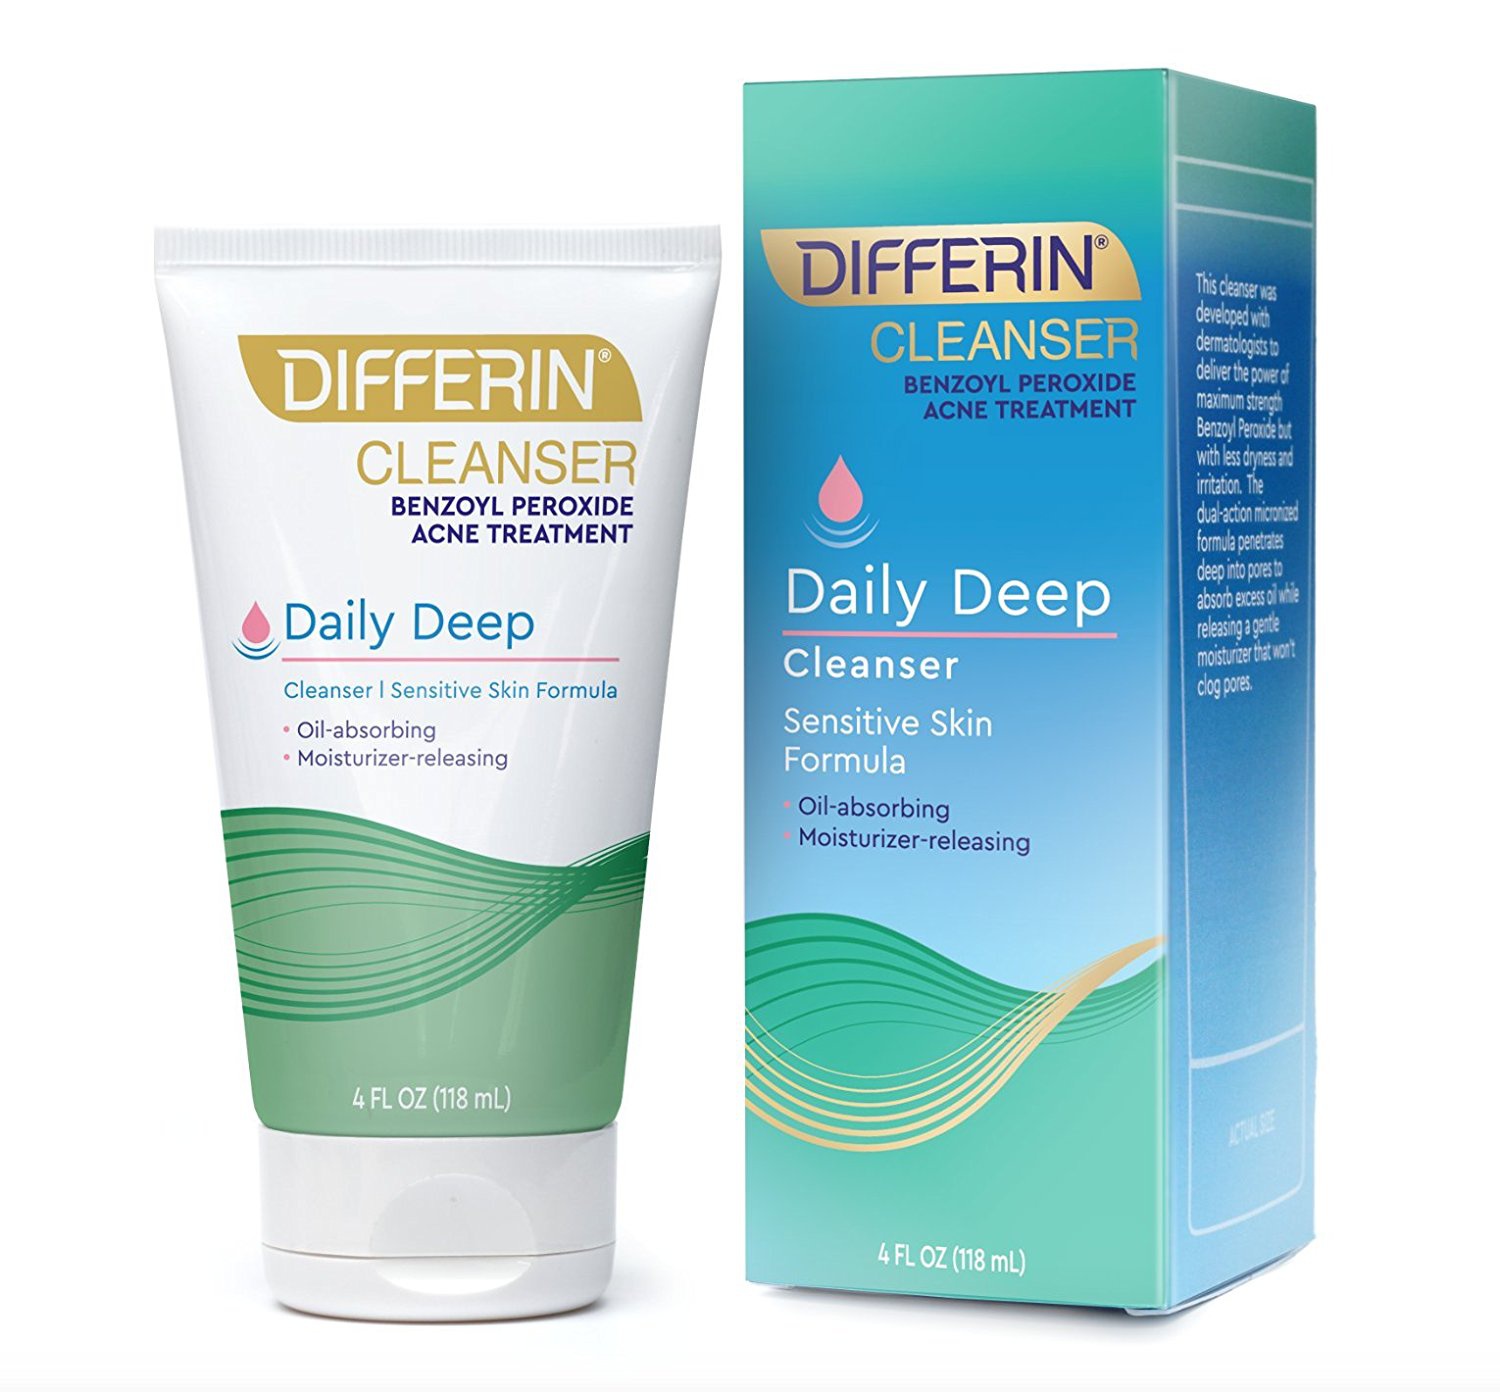 Differin Daily Deep Facial Cleanser